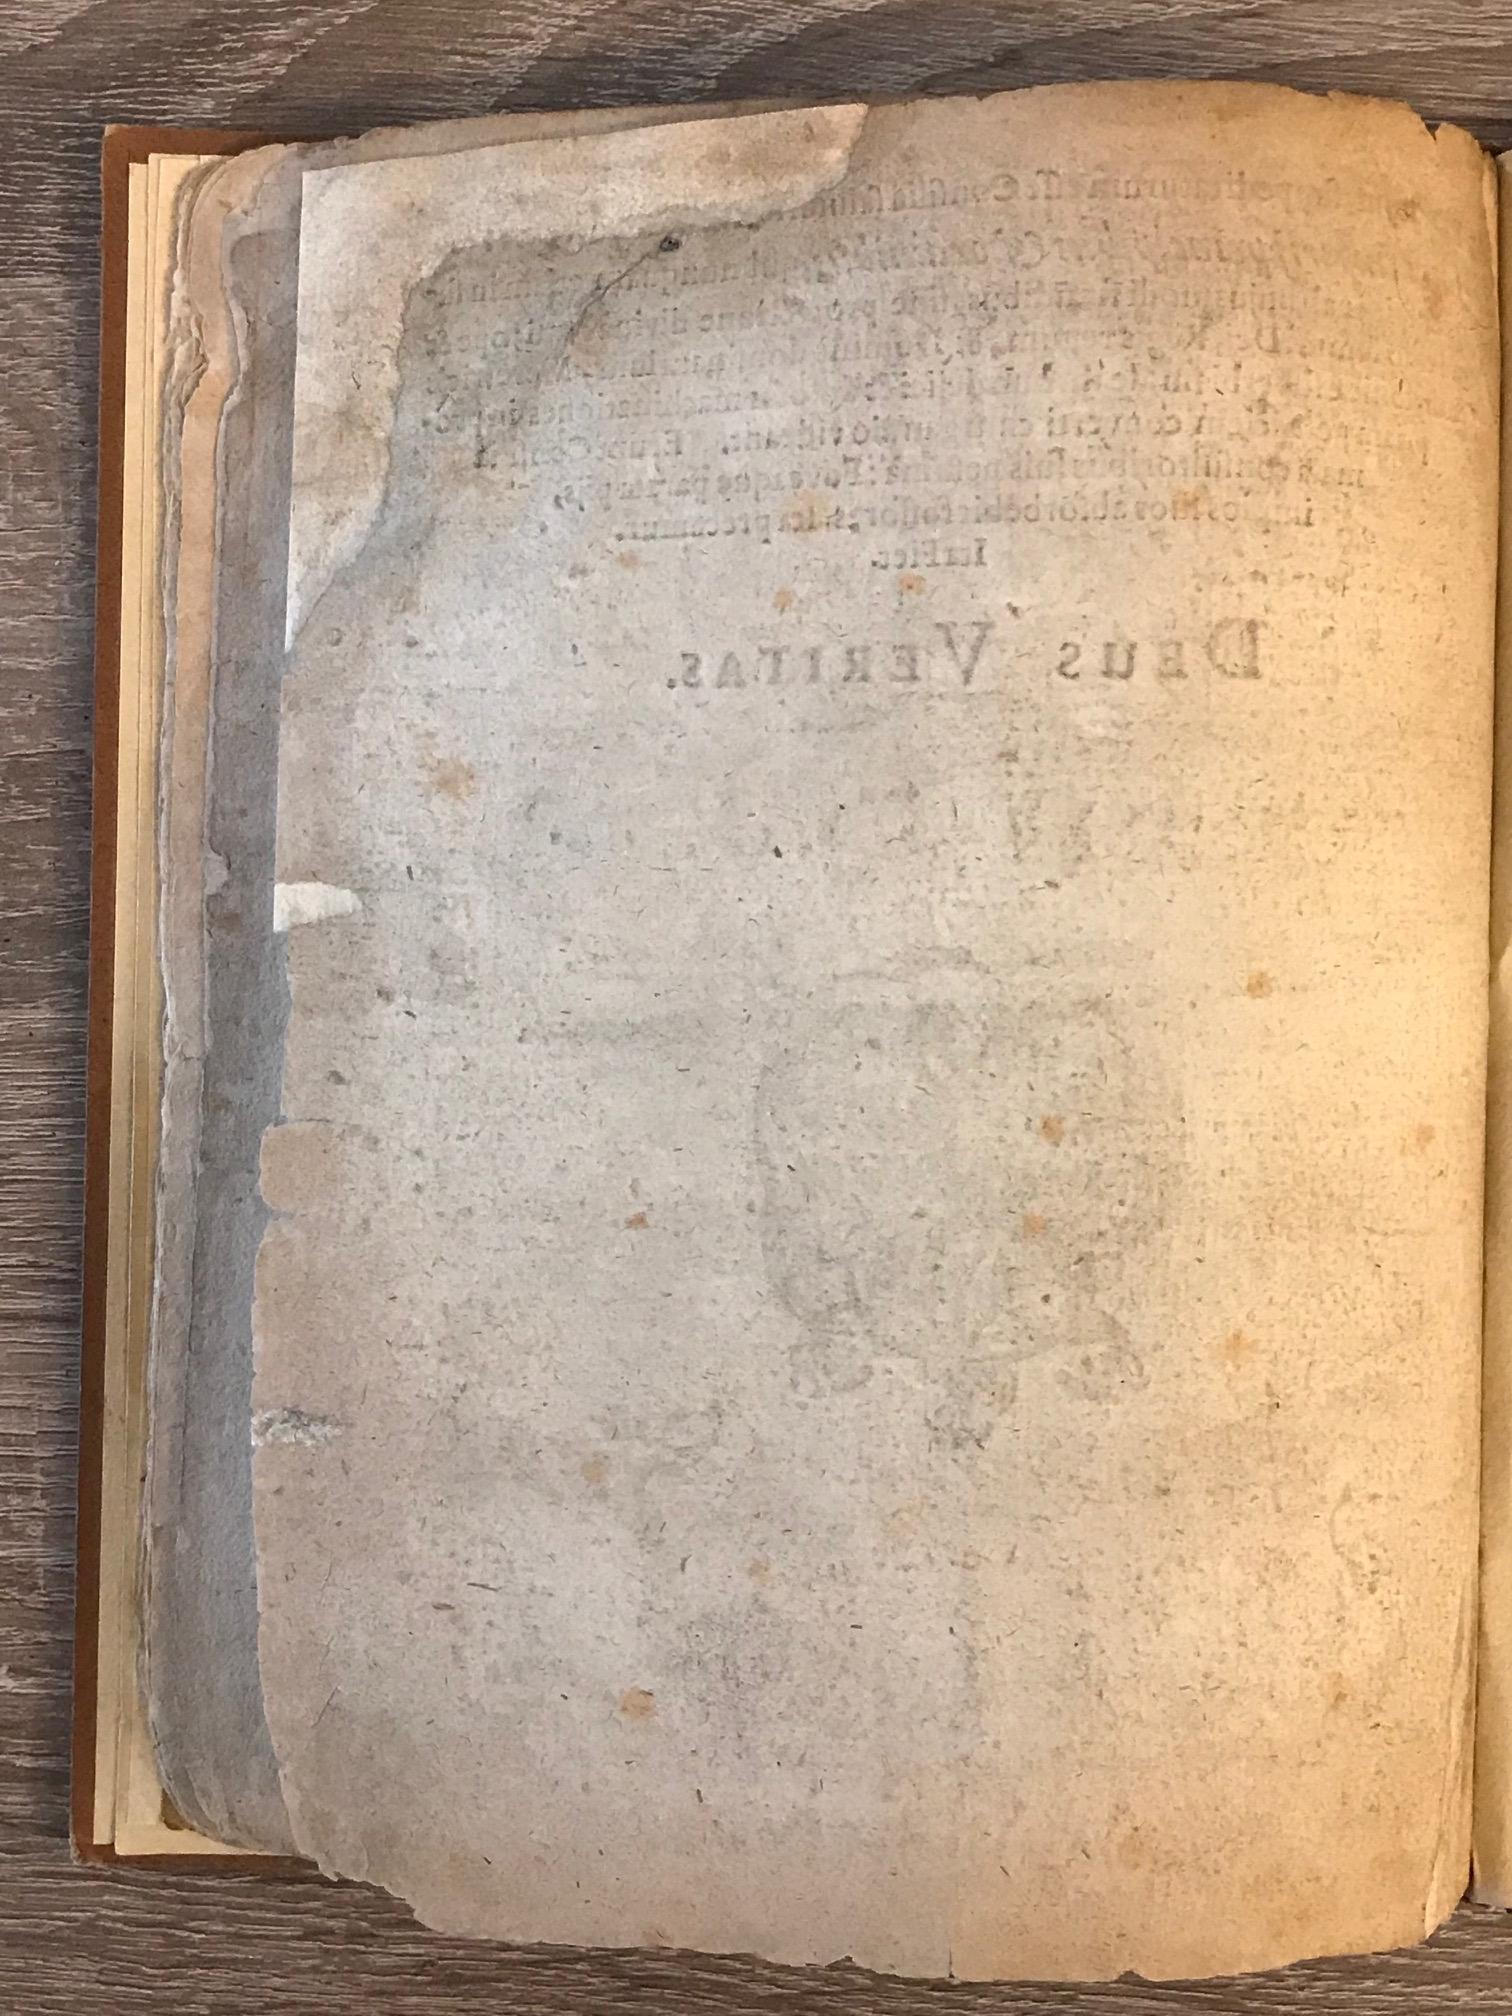 Rare Book about Comet Halley, 1619, Extremely Rare First Edition For Sale 4